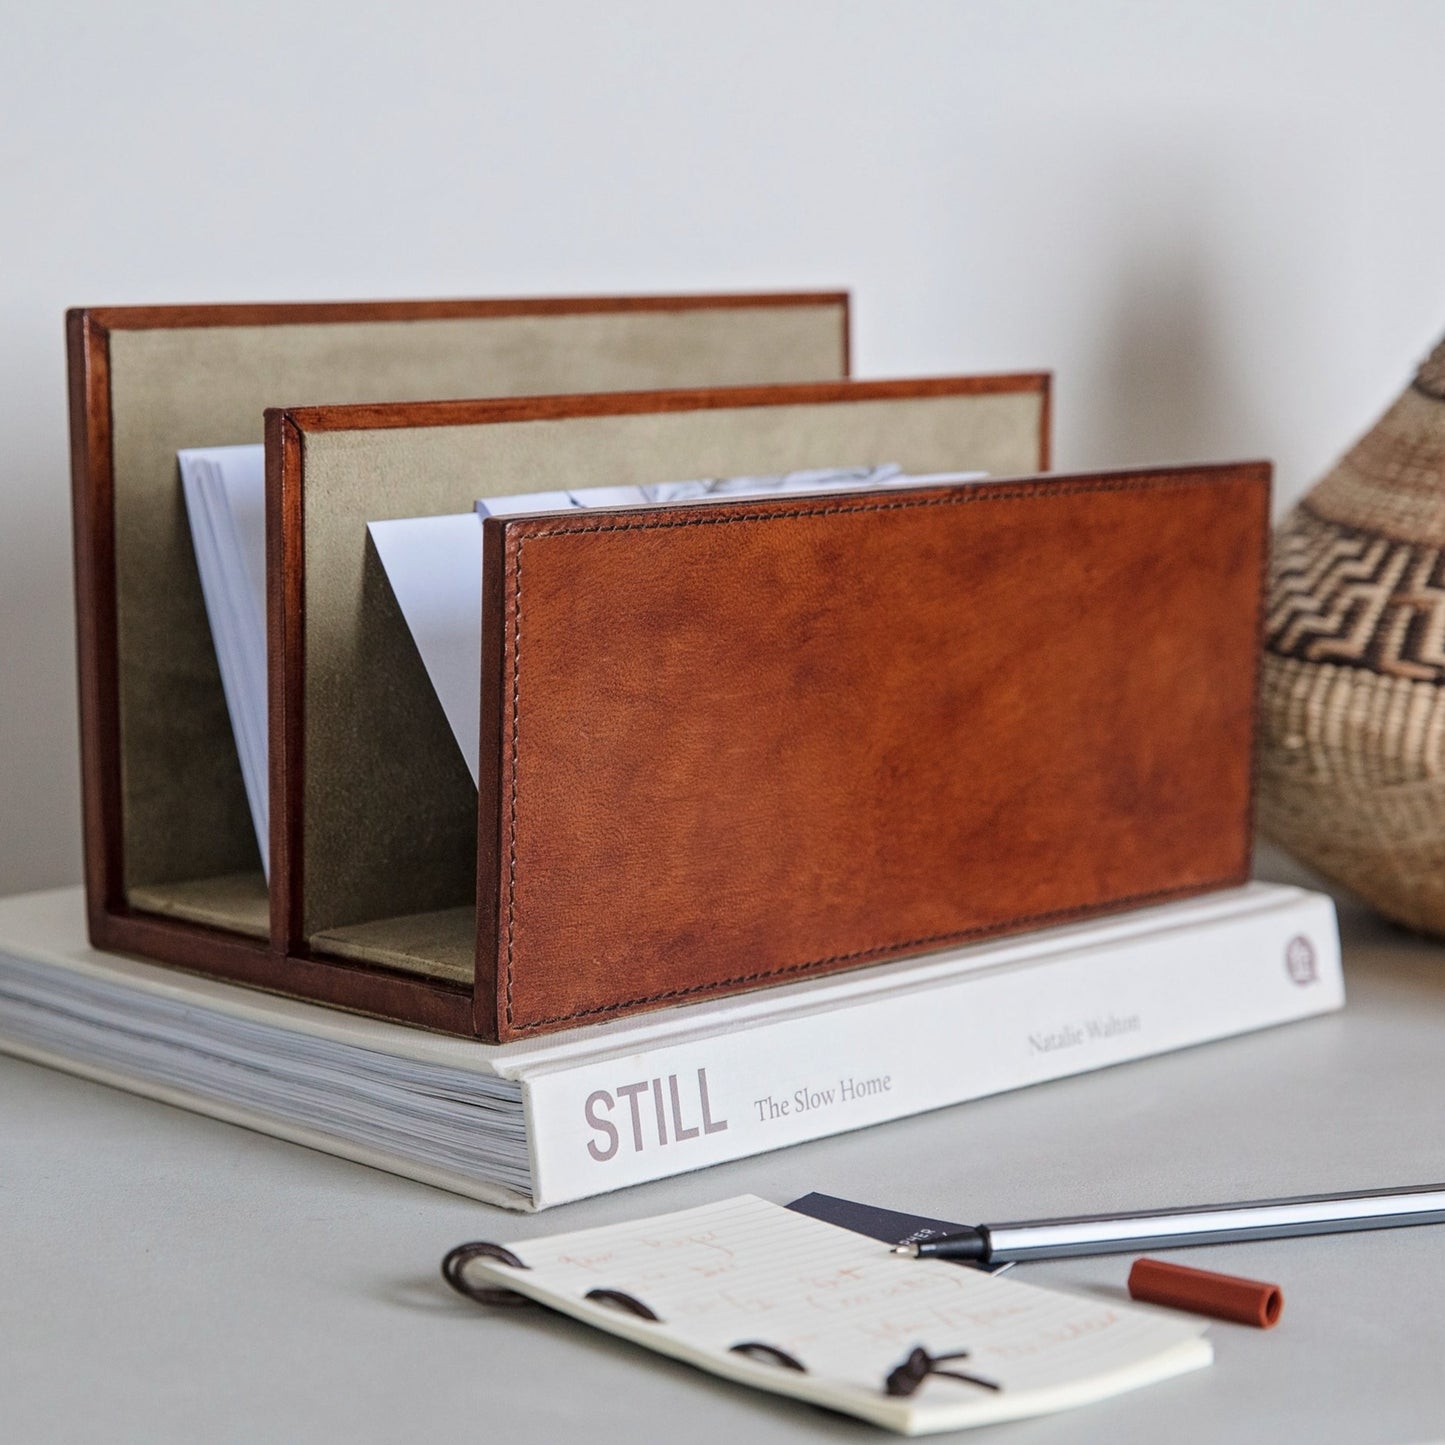 Letter rack in tan leather, with a suede interior. Part of a collection of luxury desk accessories, this makes a stylish and unique new home or wedding gift.